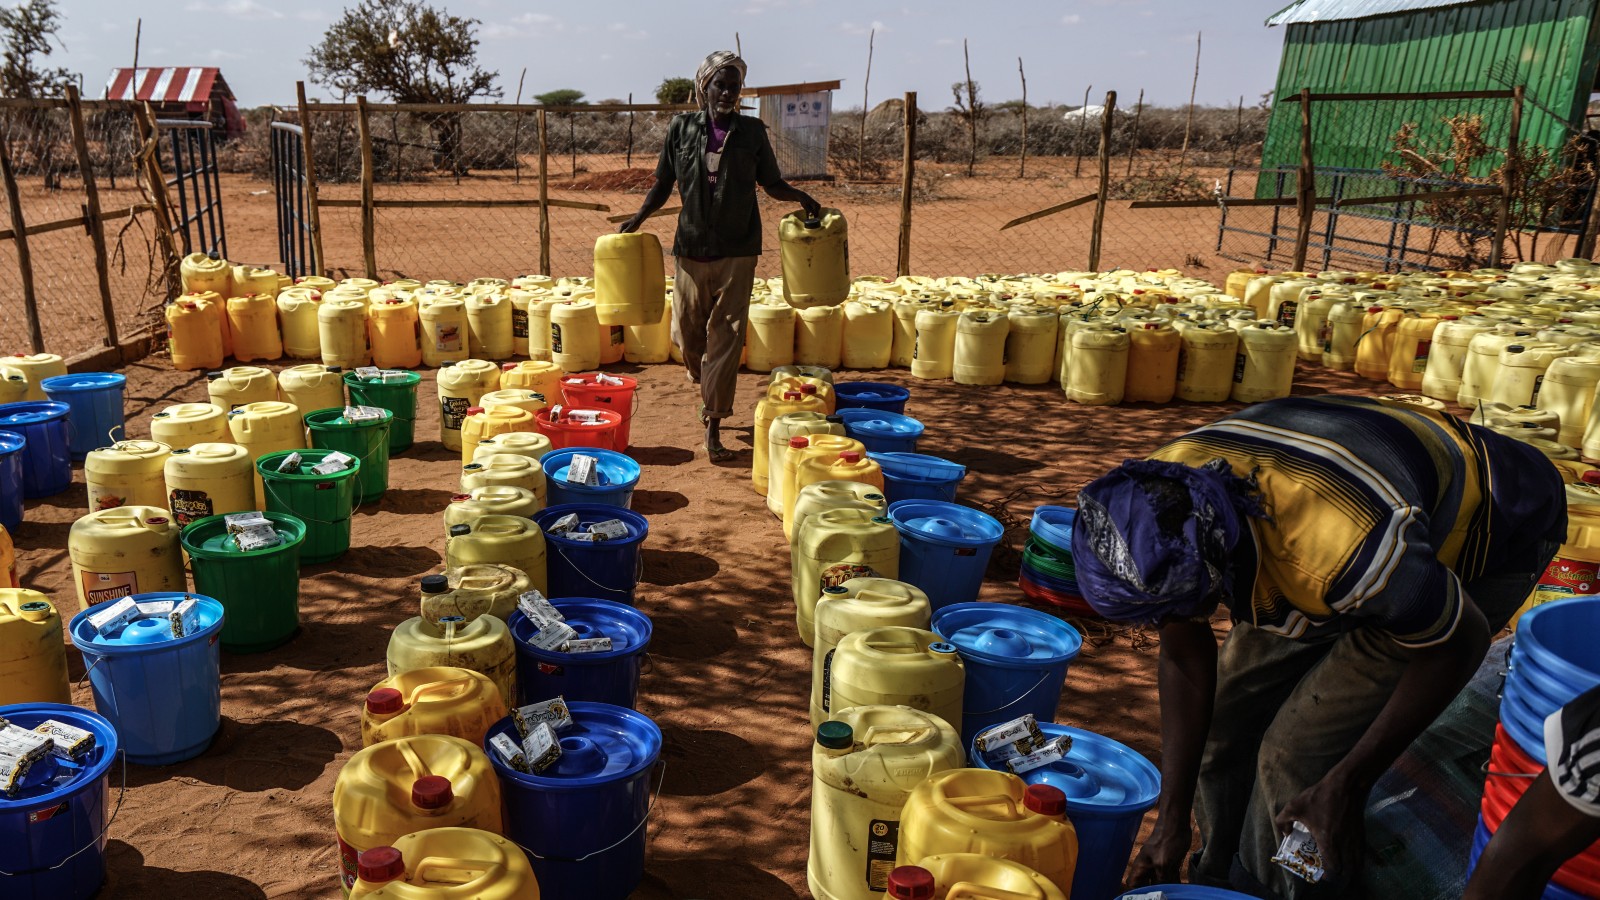 Jerrycans, used for storing water, shortly before being disbursed to displaced families by the non-government organization World Vision International in the Kaxareey IDP (Internally Displaced Persons) settlement on October 12, 2022 in Doolow, Somalia. UN figures show over 1.4 million Somalis were displaced by drought and conflict-related issues in 2022. (Photo by Giles Clarke/UNOCHA via Getty Images)